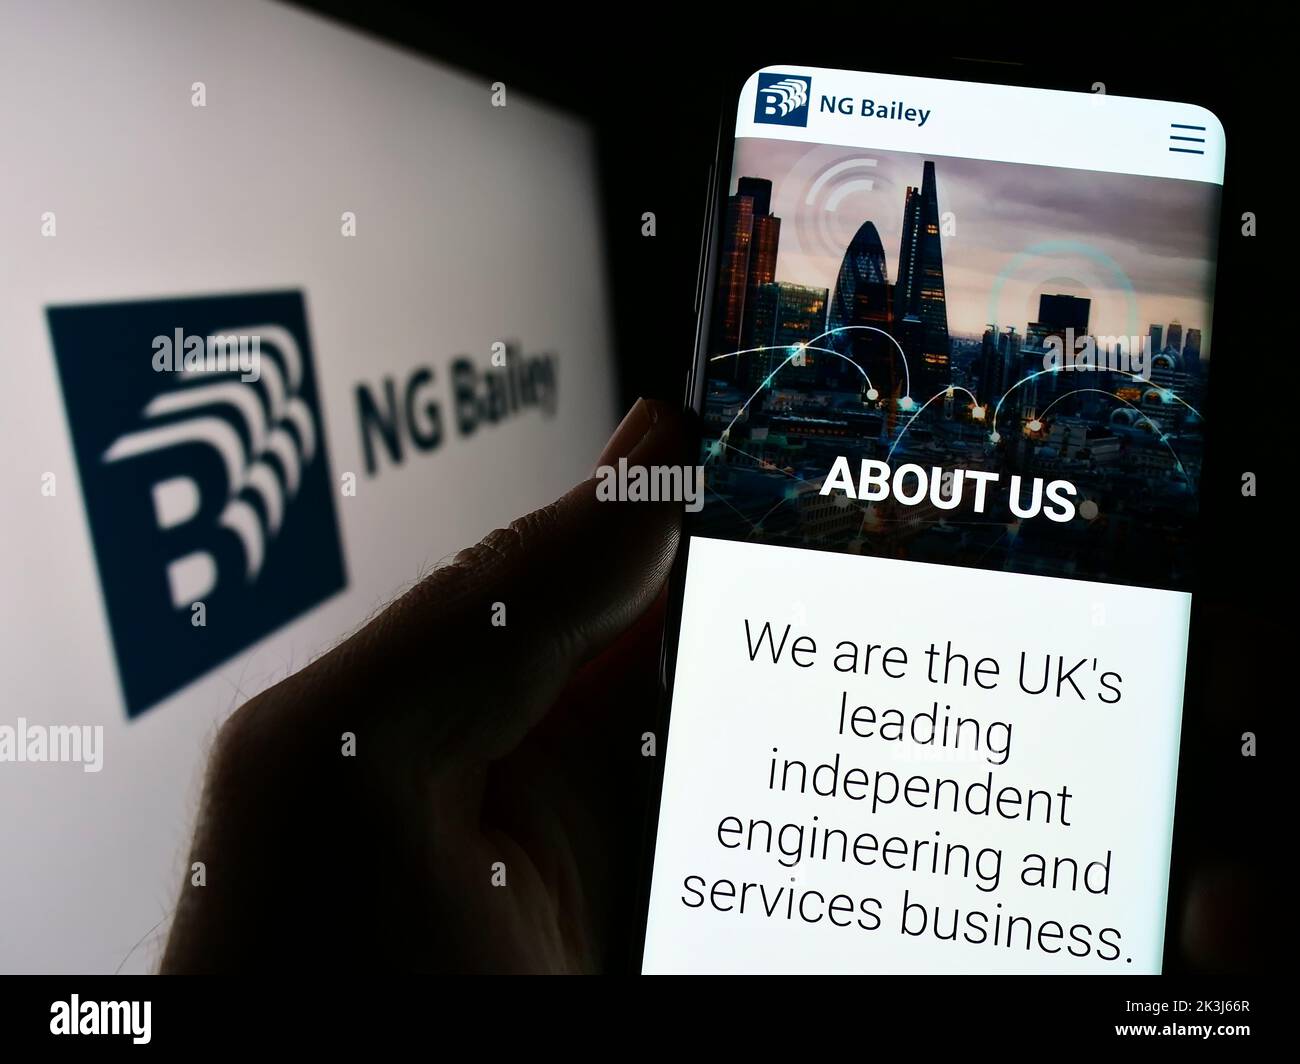 Person holding mobile phone with website of engineering company NG Bailey Group Limited on screen with logo. Focus on center of phone display. Stock Photo